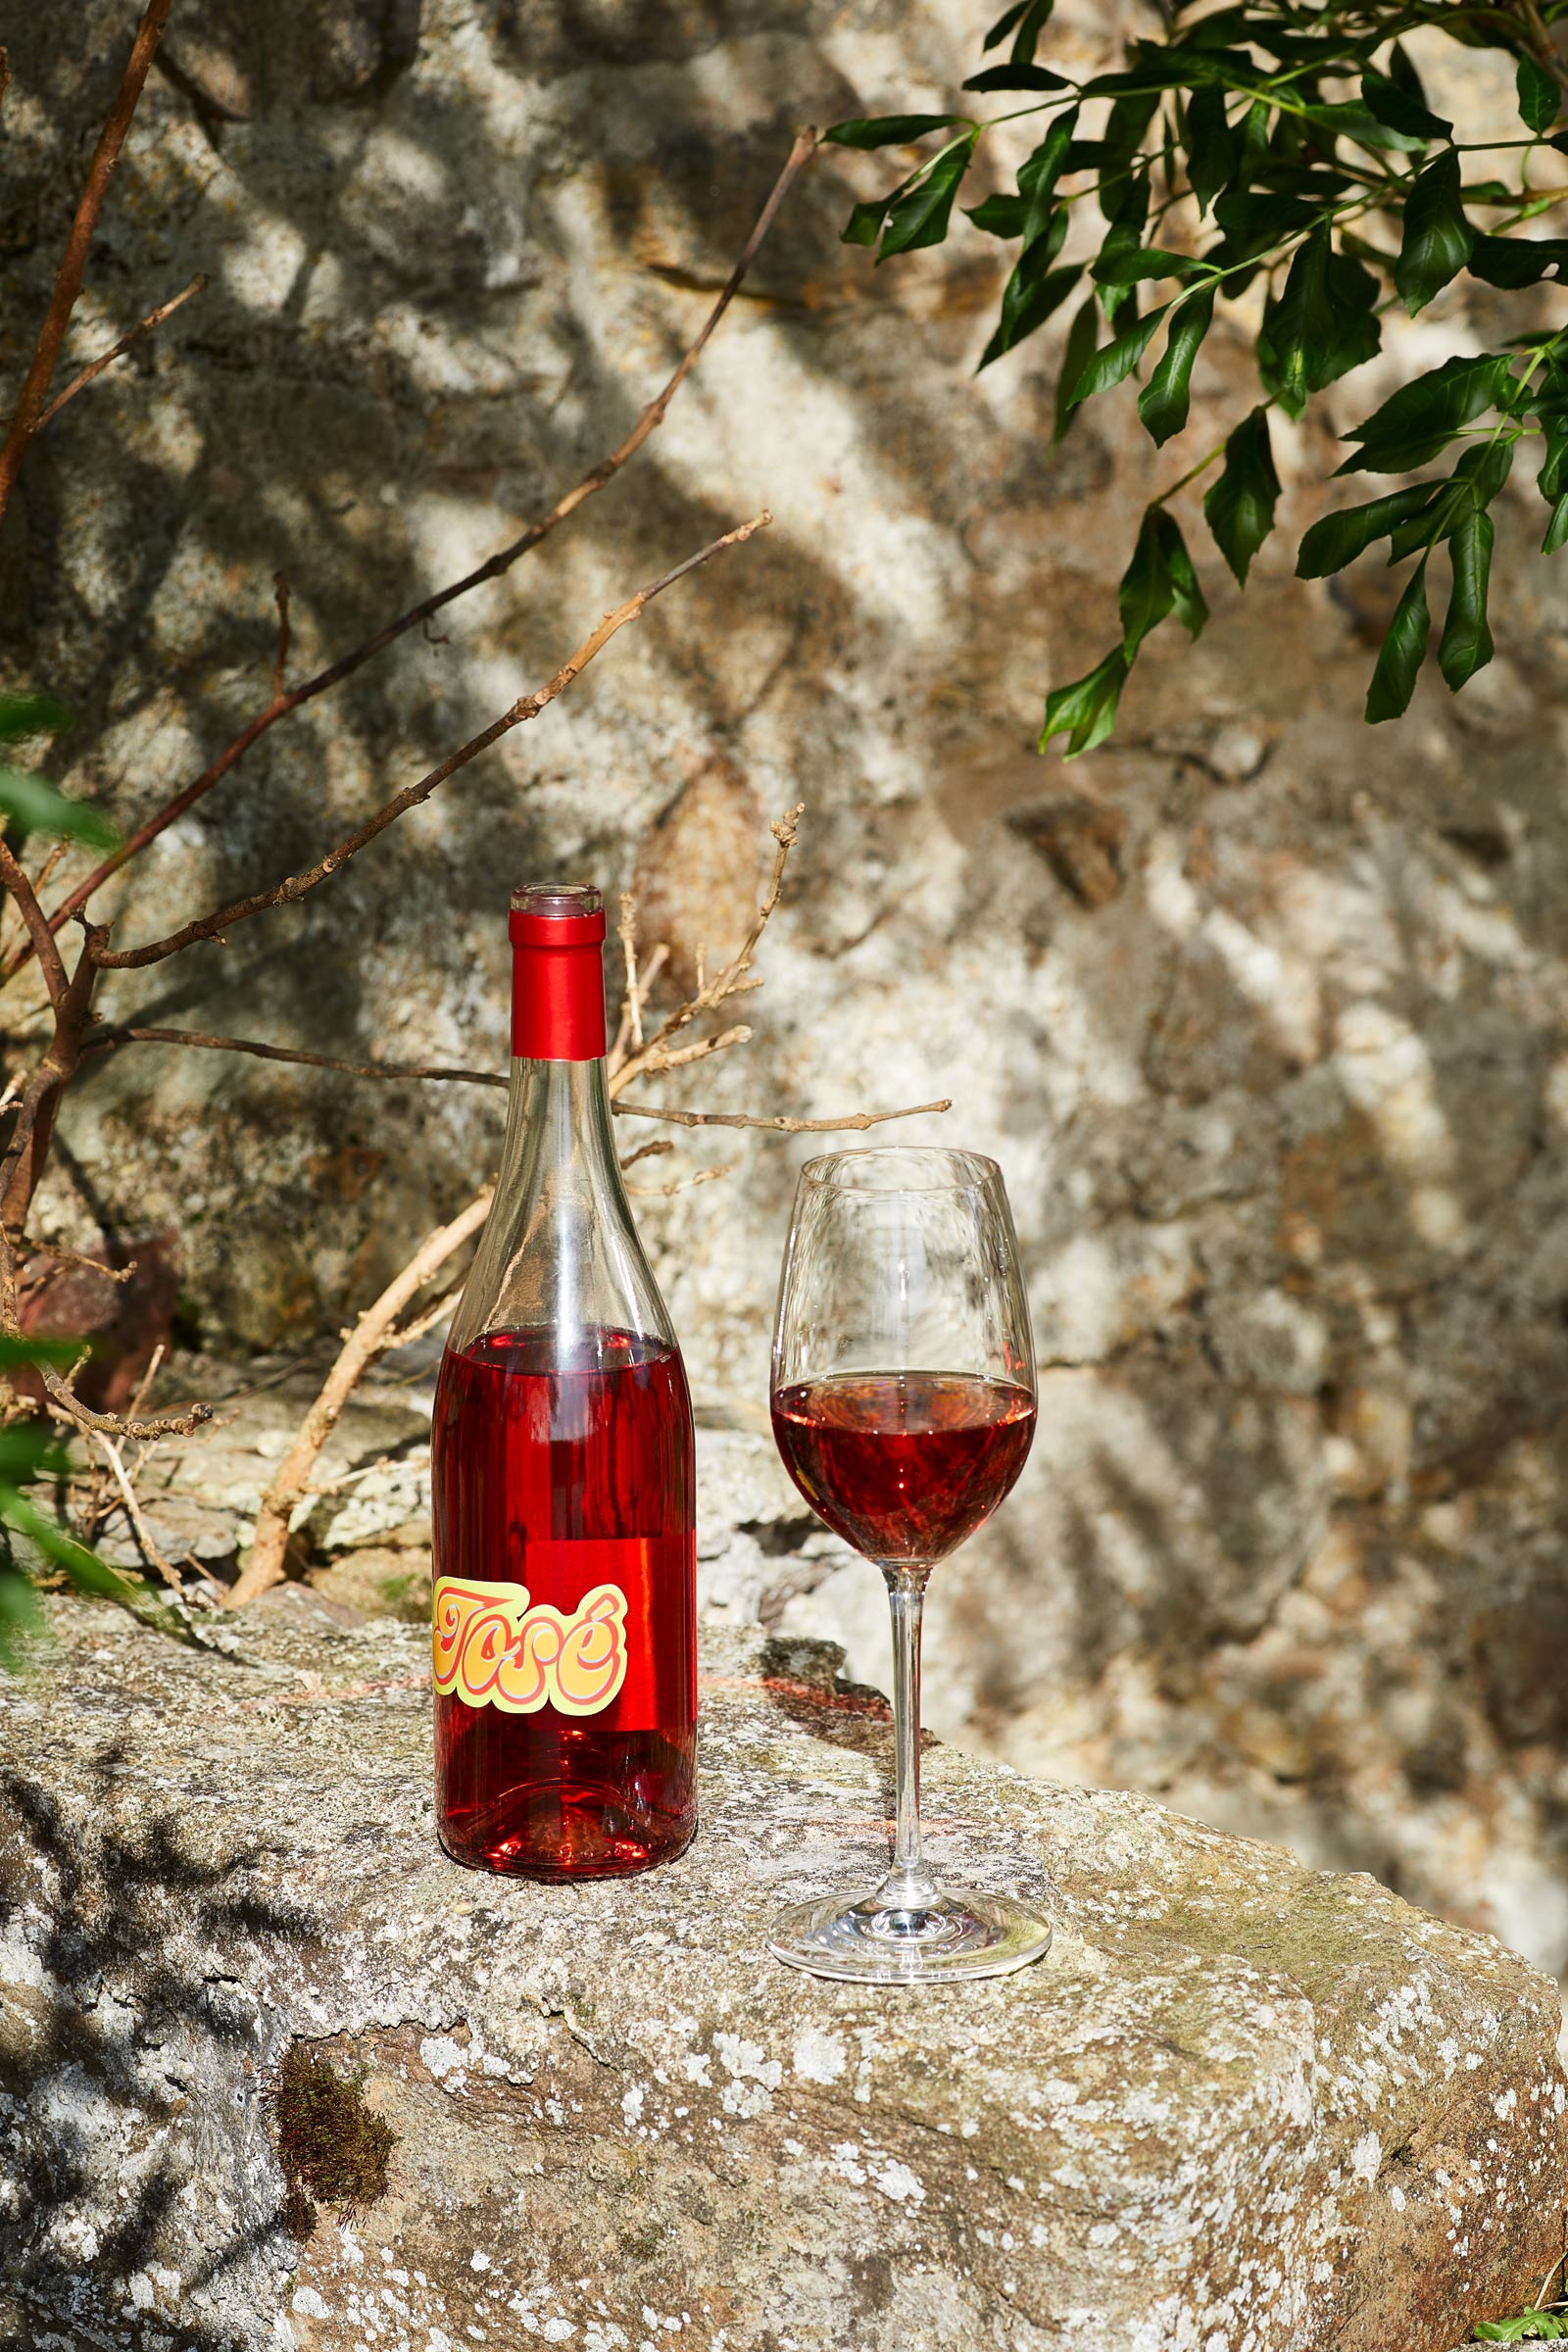 Jose Rose Wine and glass at De-Burgh Wine Merchants, Alastair Ferrier food and drink photographer